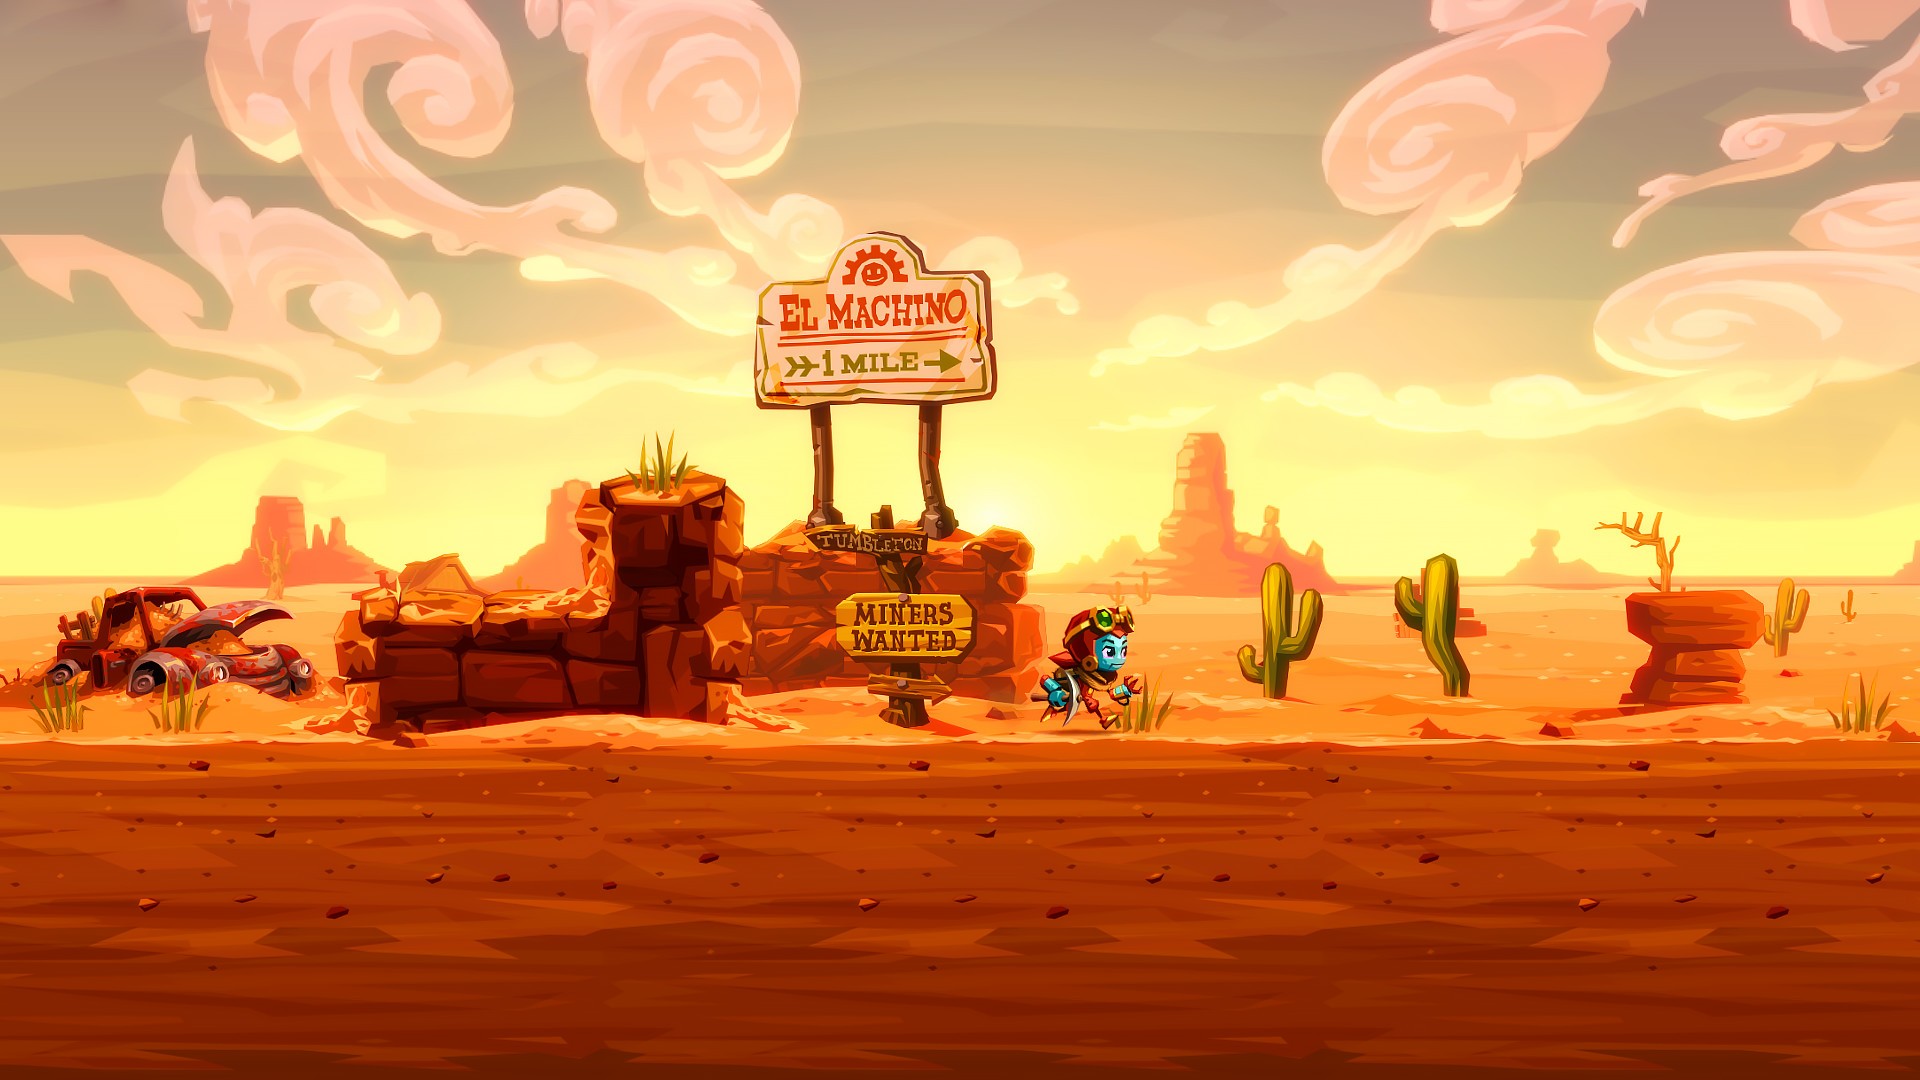 Roundup: Here's What The Critics Think Of Cowboy Vampire Shooter 'Evil West